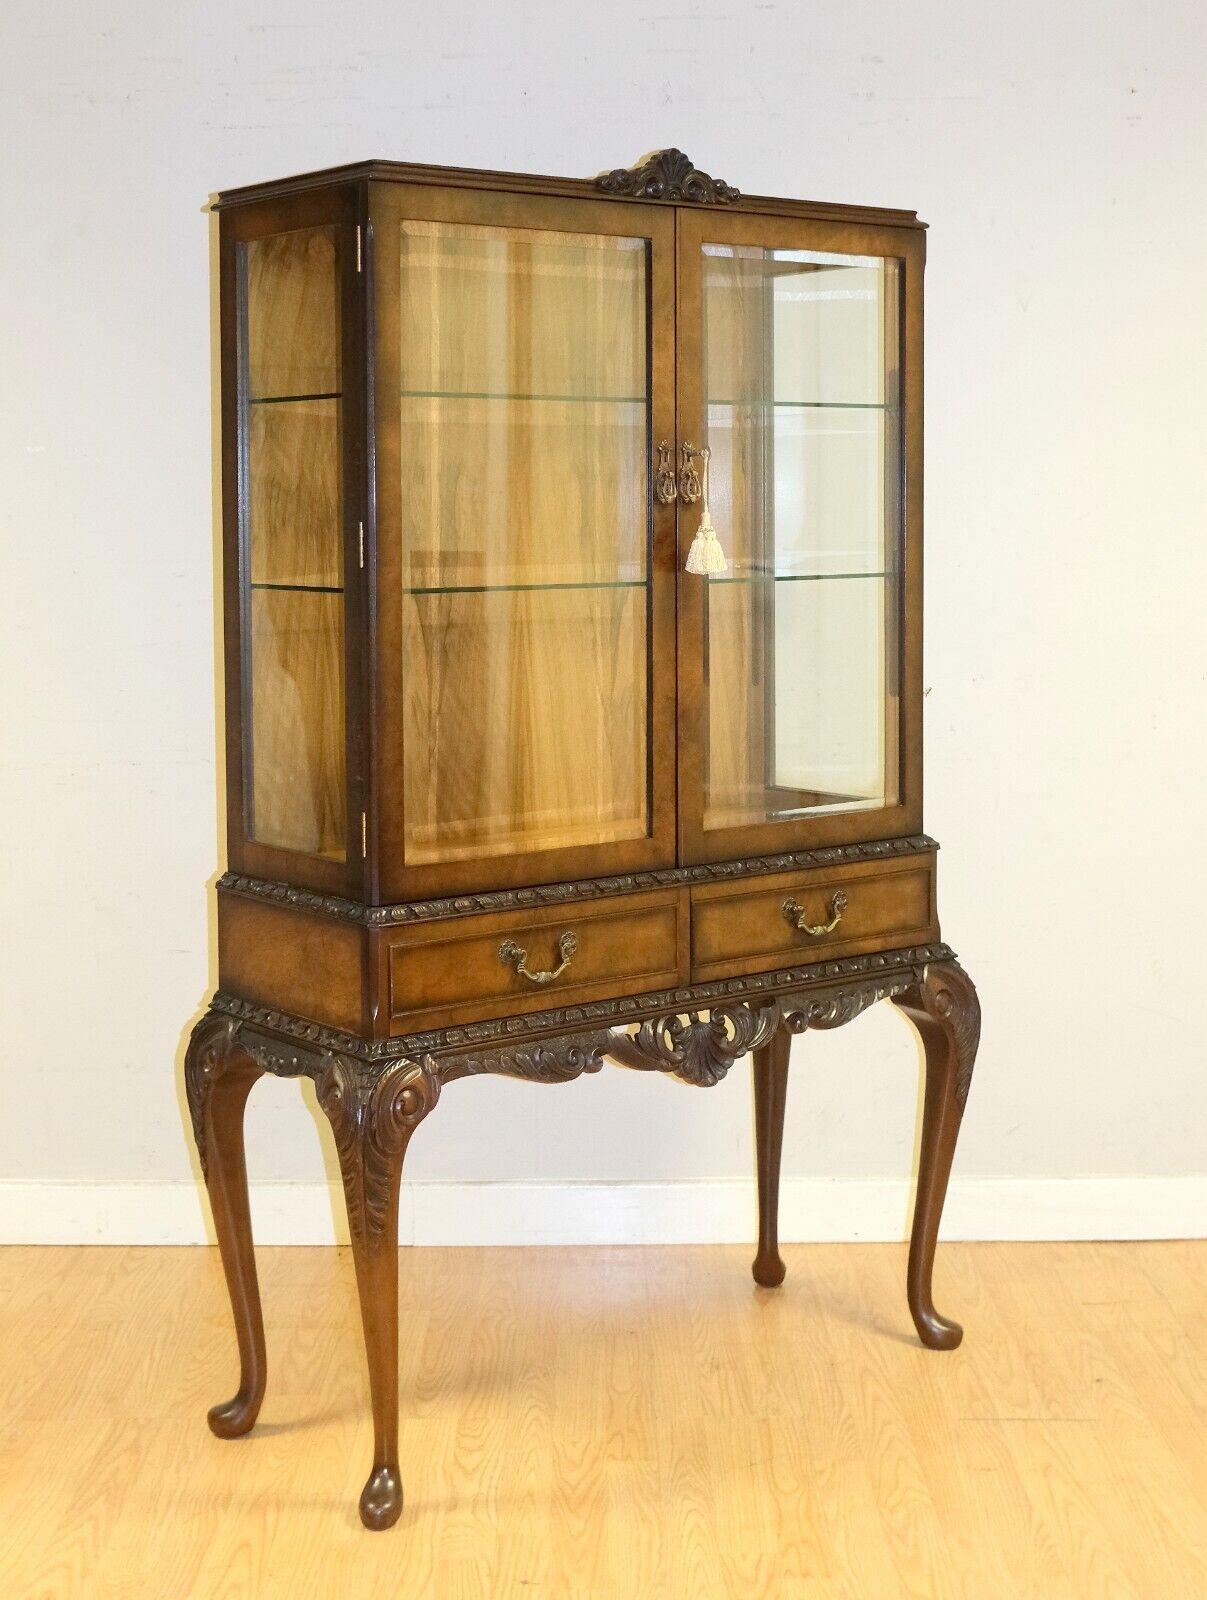 We are delighted to offer for sale this lovely English Mahogany display cabinet in Queen Ann style with original key.

The cabinet is presented with beveled glass doors and key with a superb carving around the lower and top legs and the moulded top